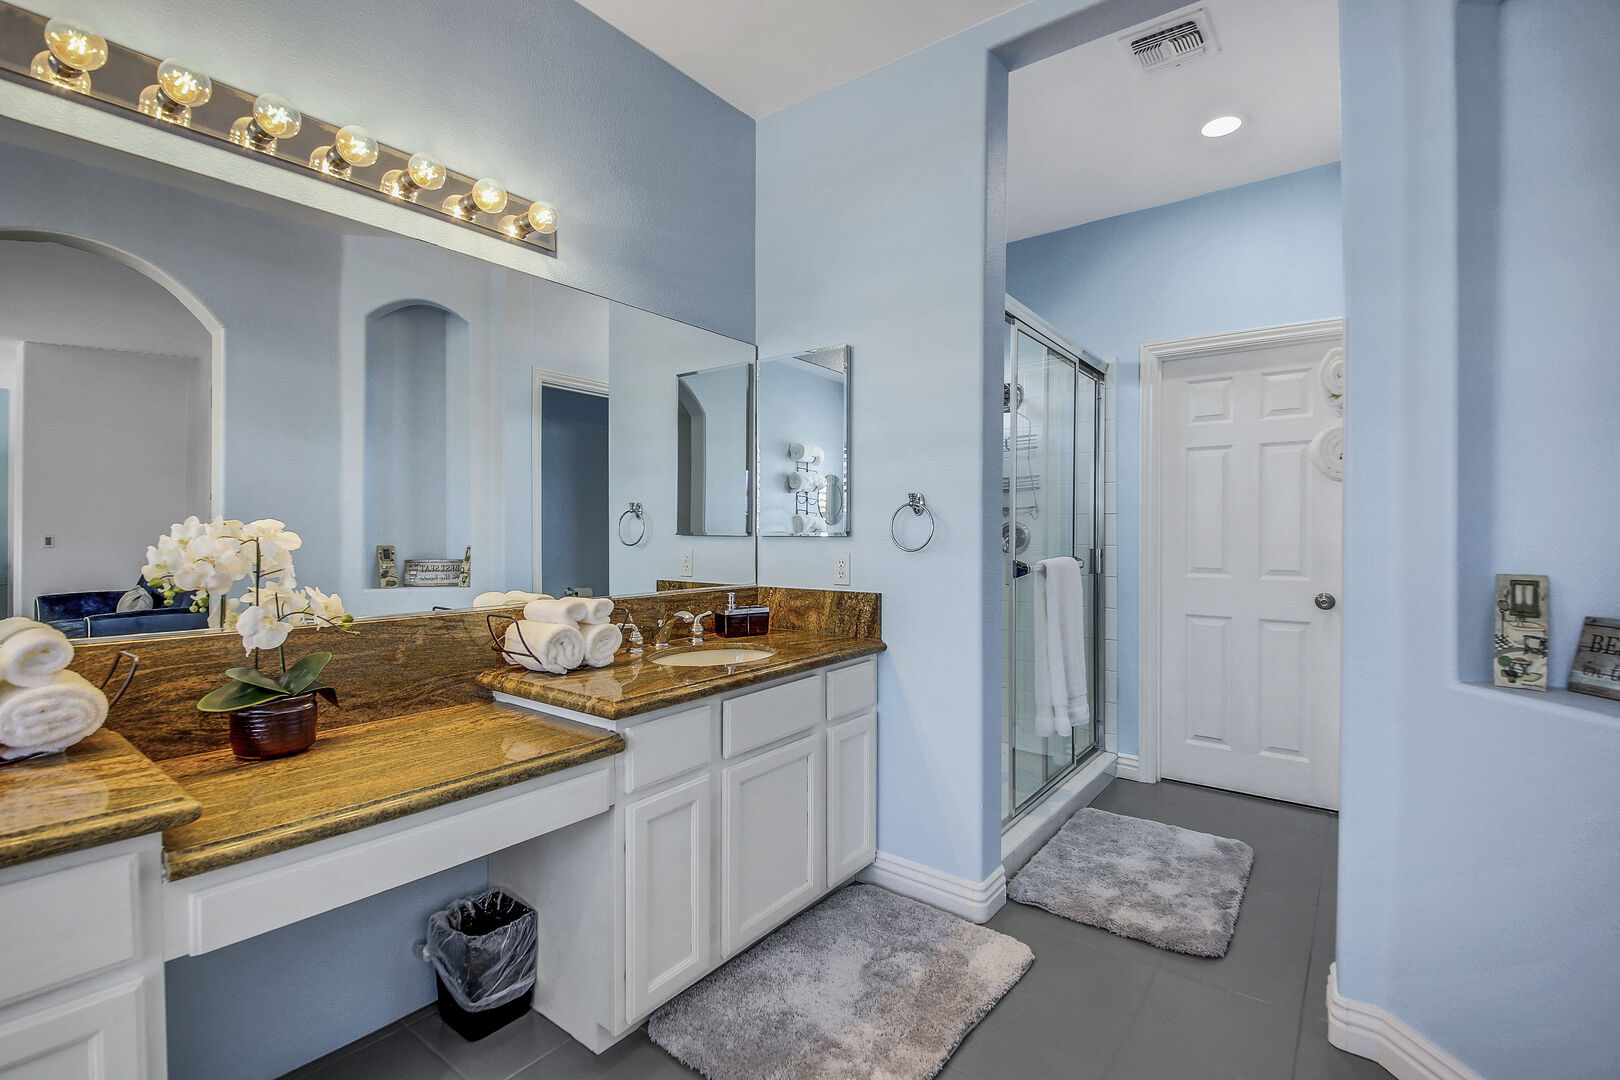 Get ready to head out on the town in this great En Suite Bathroom.